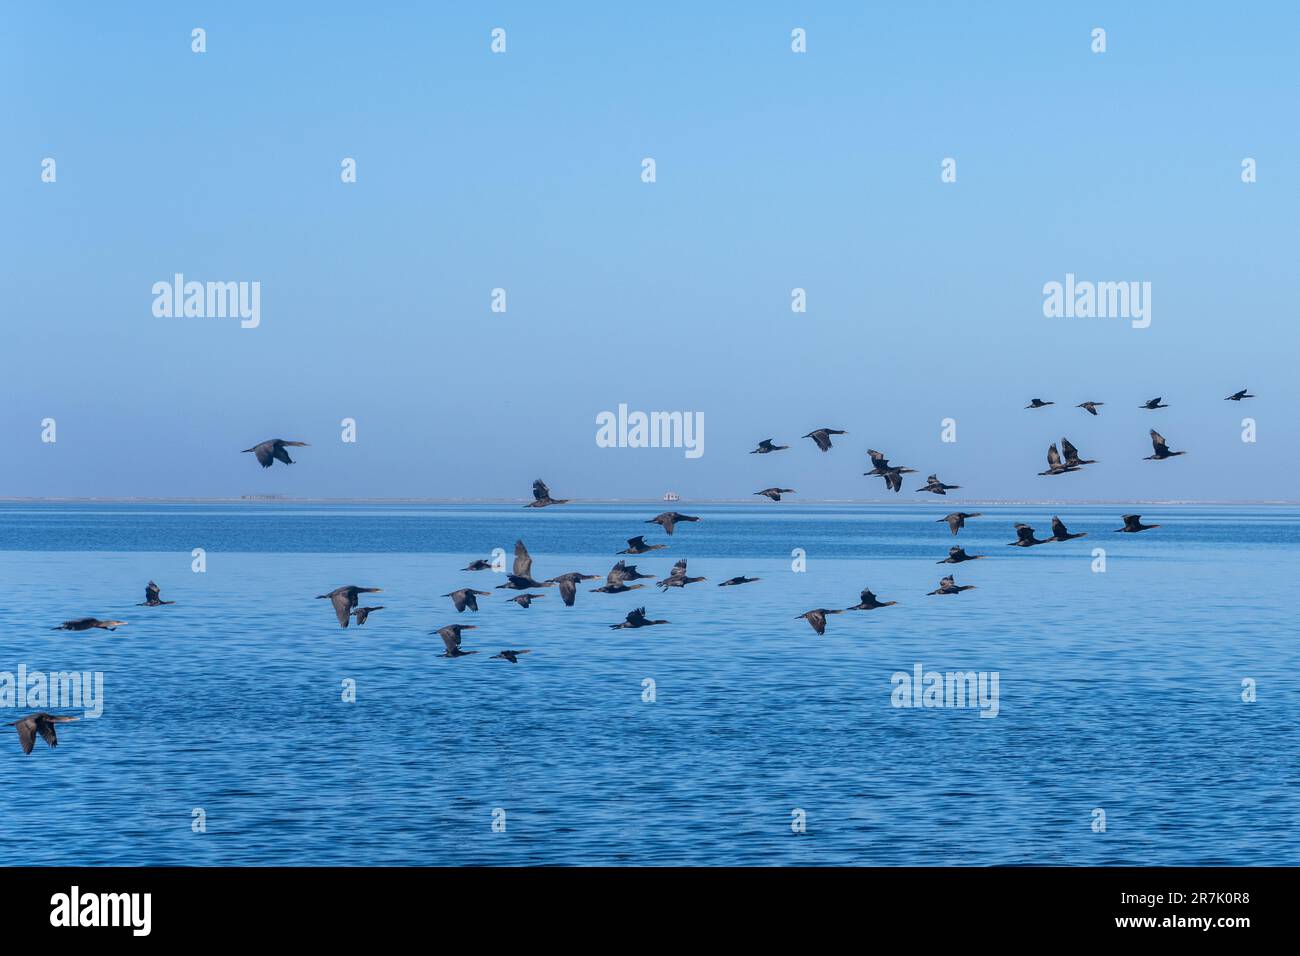 Flock of Cape cormorant or Cape shag (Phalacrocorax capensis) in Walvis Bay, Namibia in flight Stock Photo